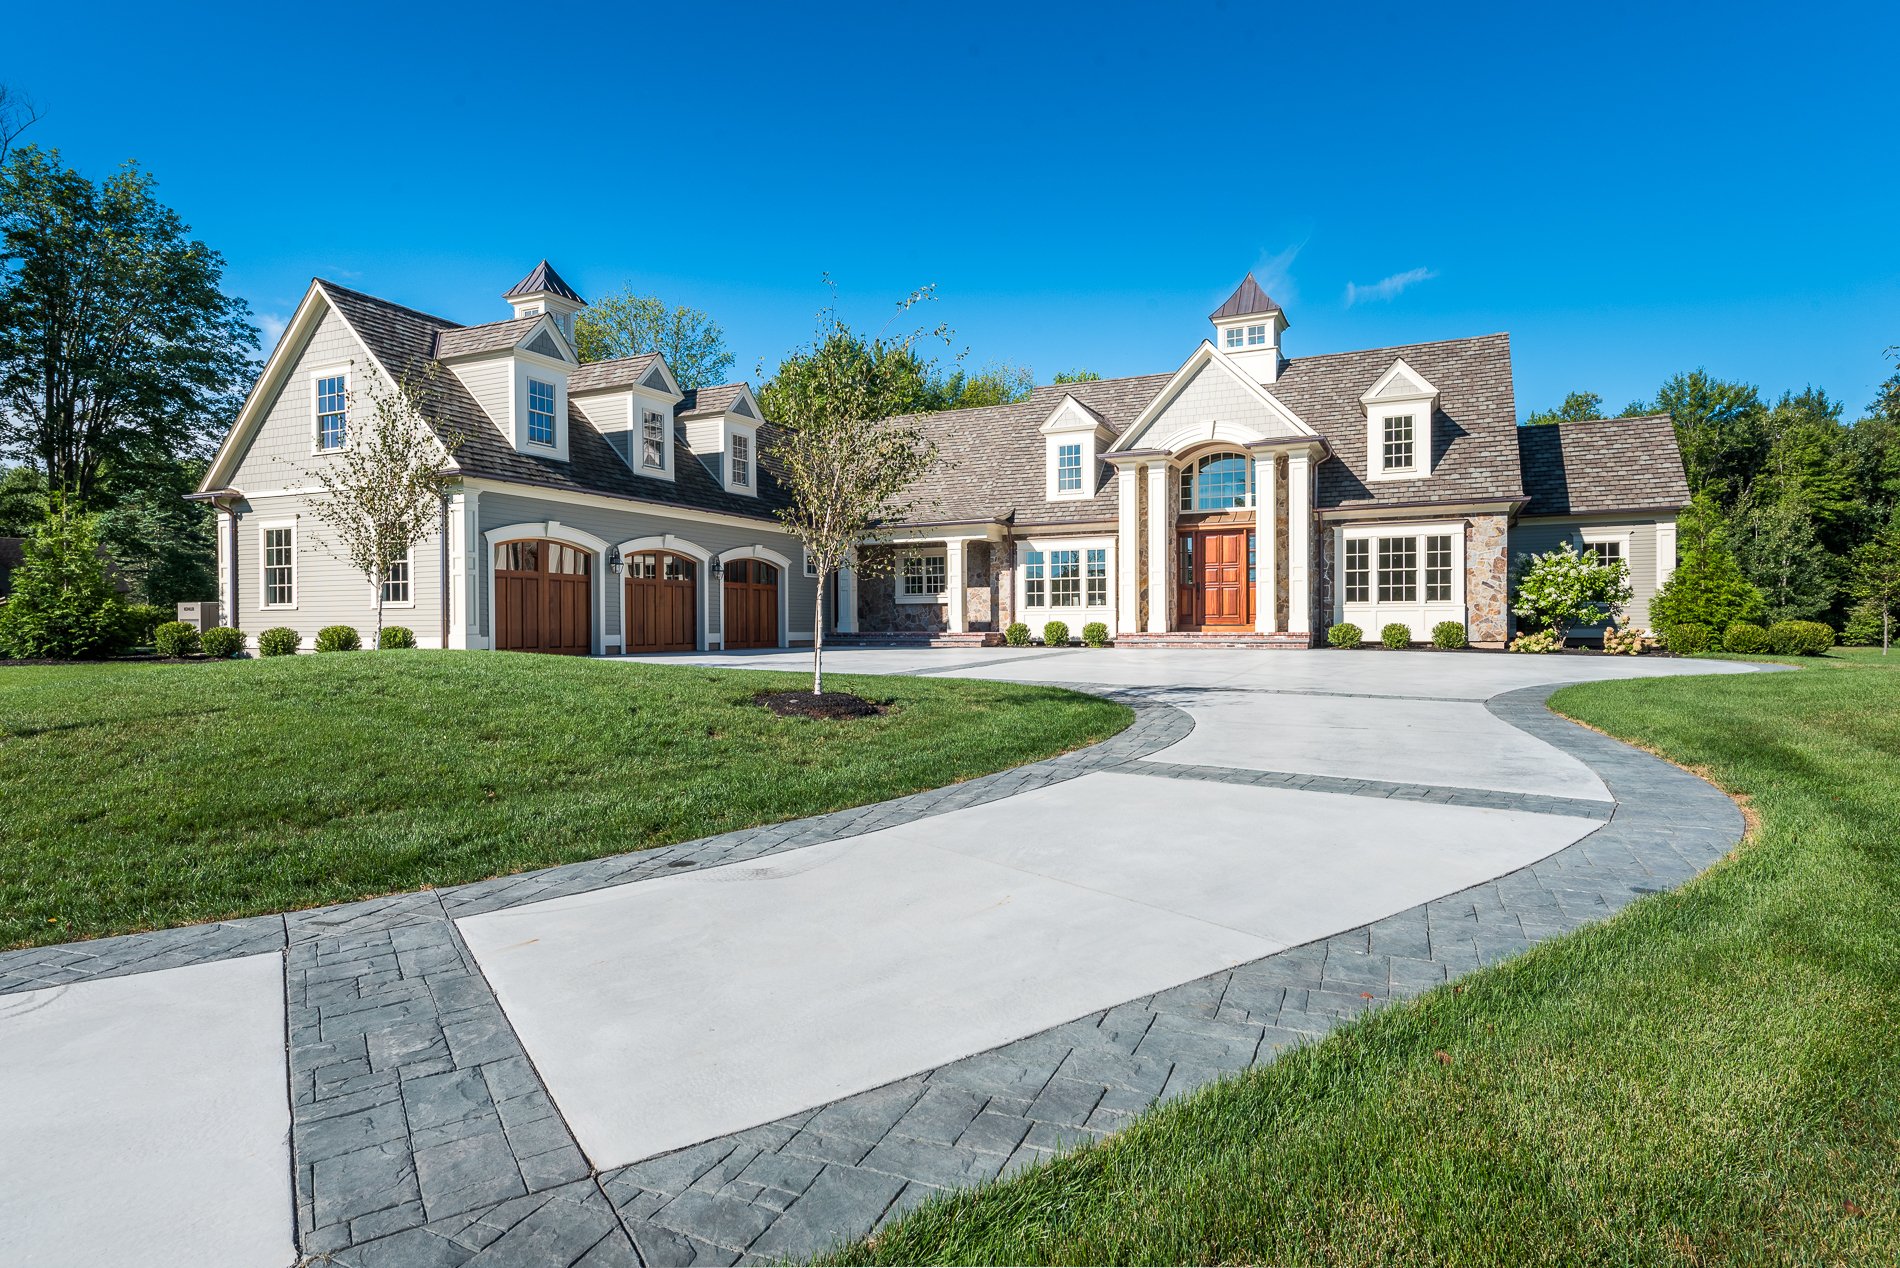 Driveway Cleaning Company in Bergen County NJ